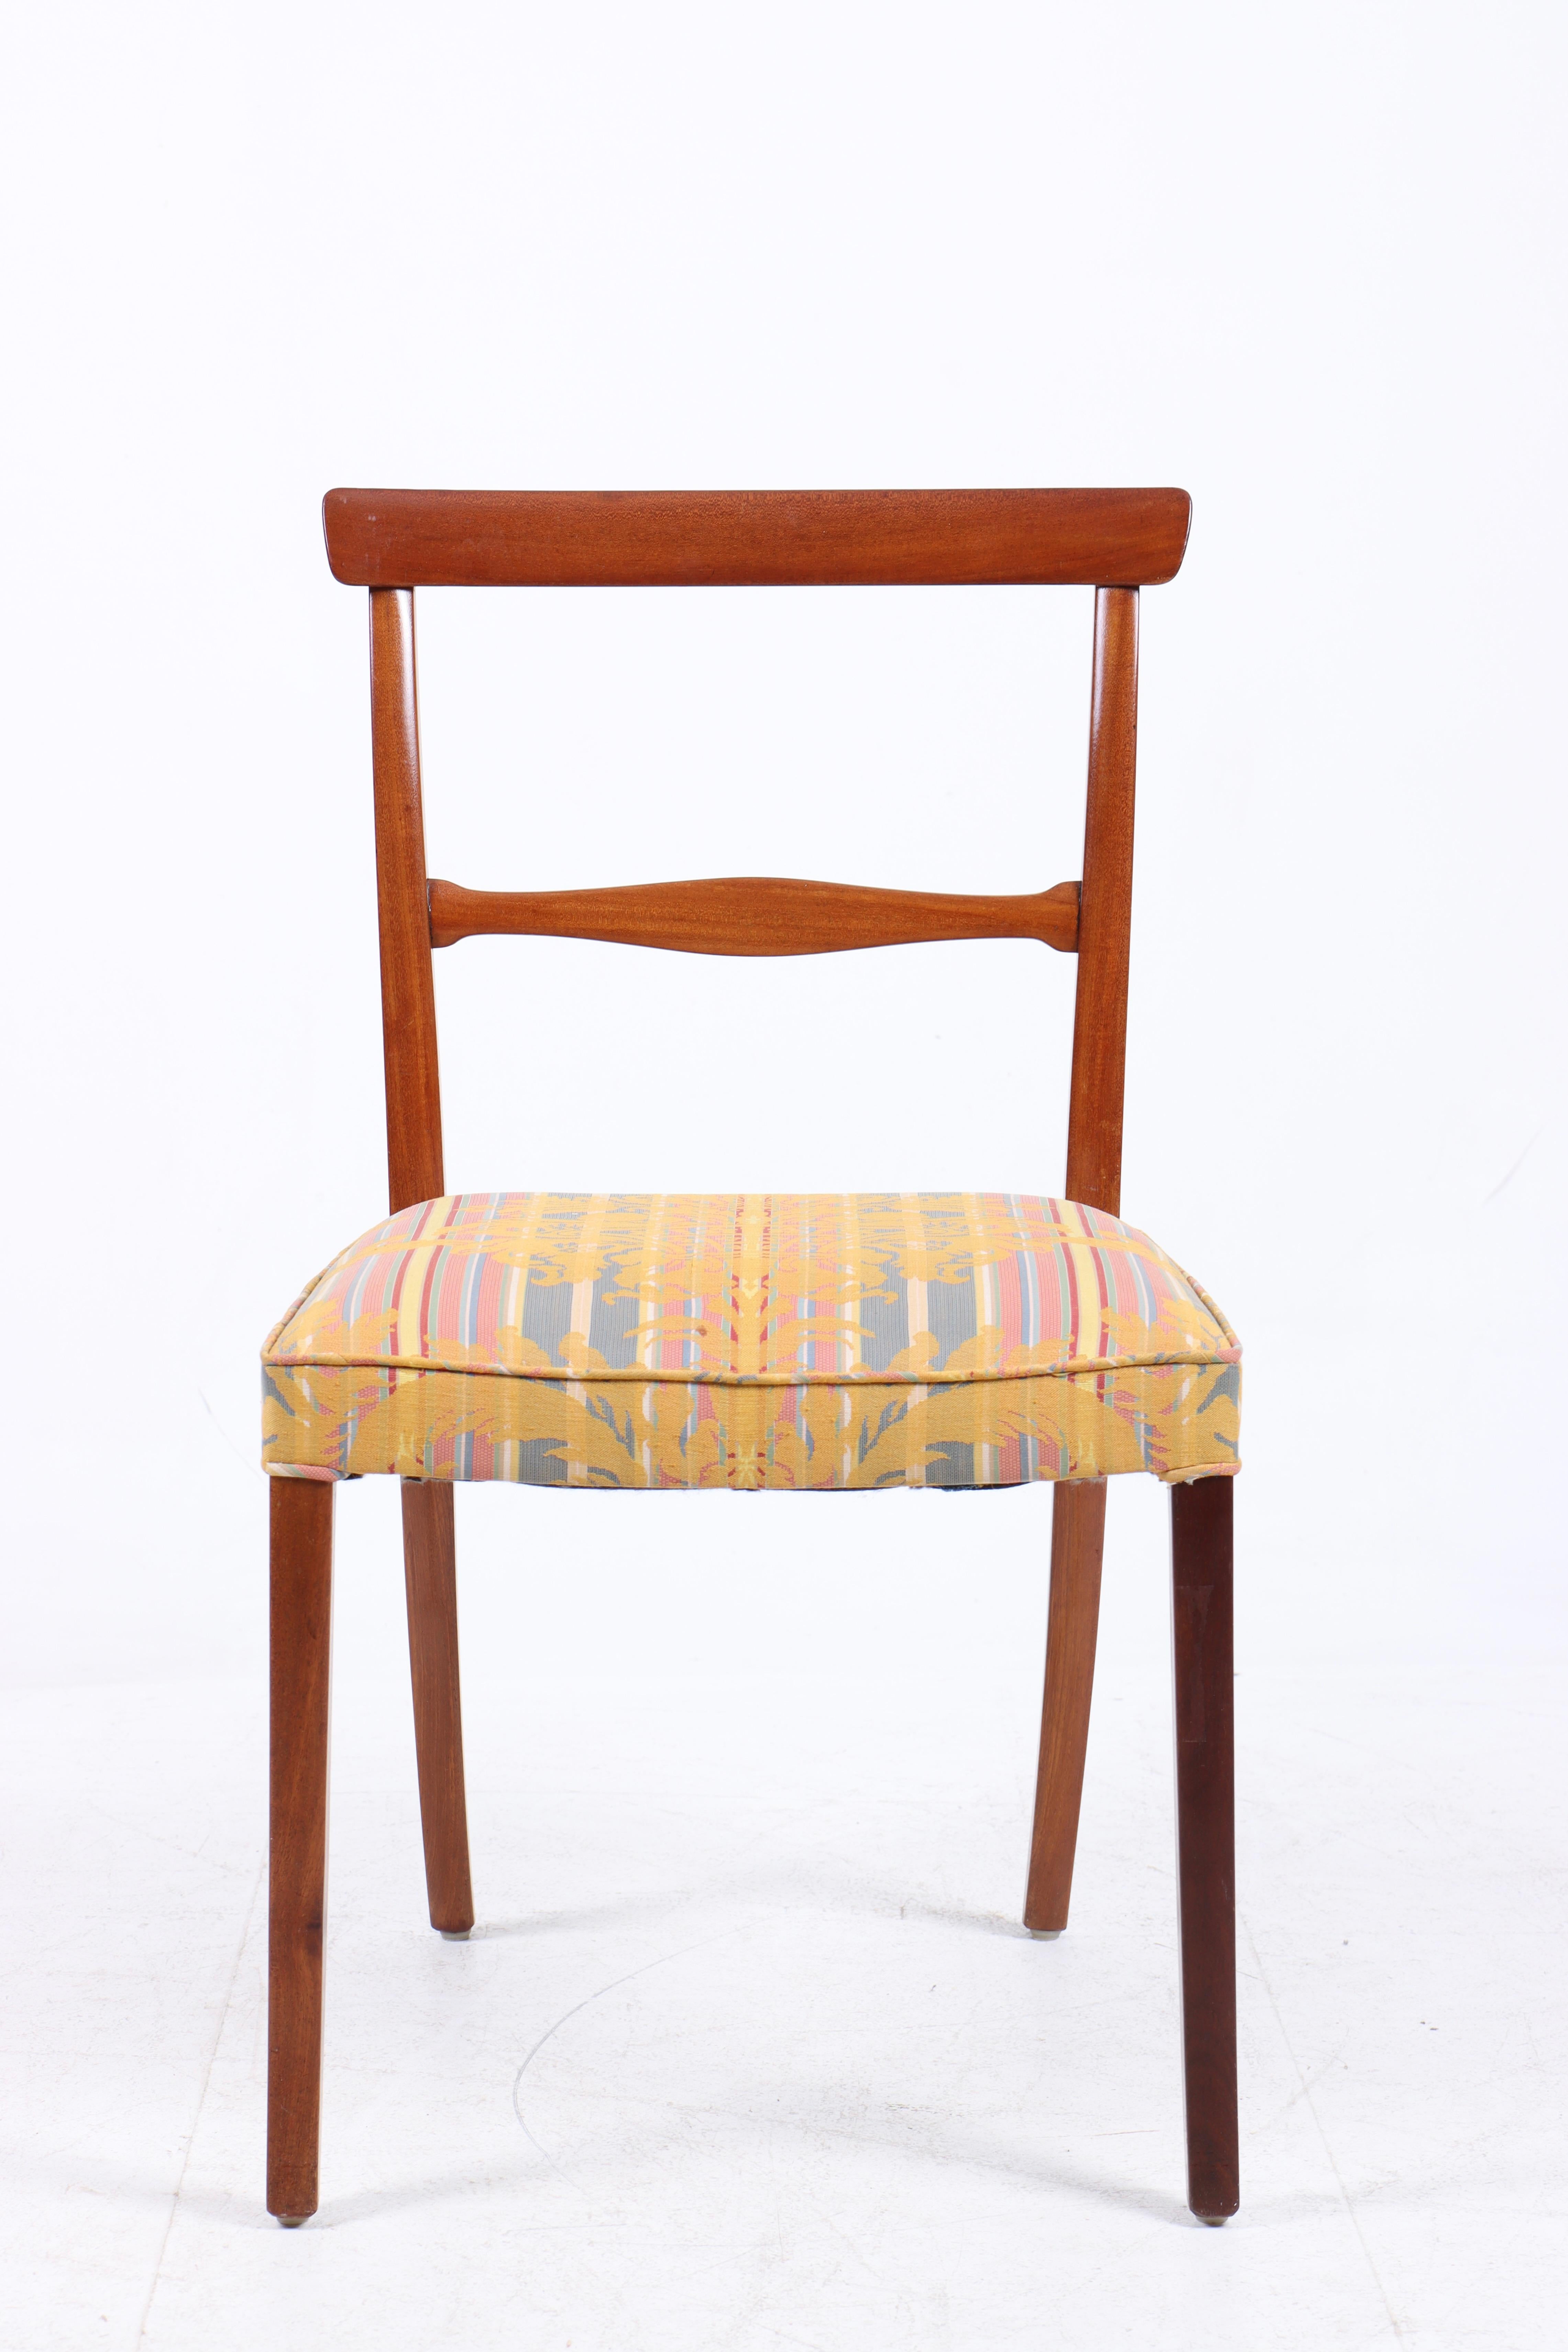 Set of 12 mahogany chairs with curvy, horizontal bar in back. Seat upholstered with patterned fabric. Designed 1962. These examples made 1962–1970s by cabinetmaker A.J. Iversen, with maker's label. (12)
Literature: Noritsugu Oda: “Danish Chairs”,